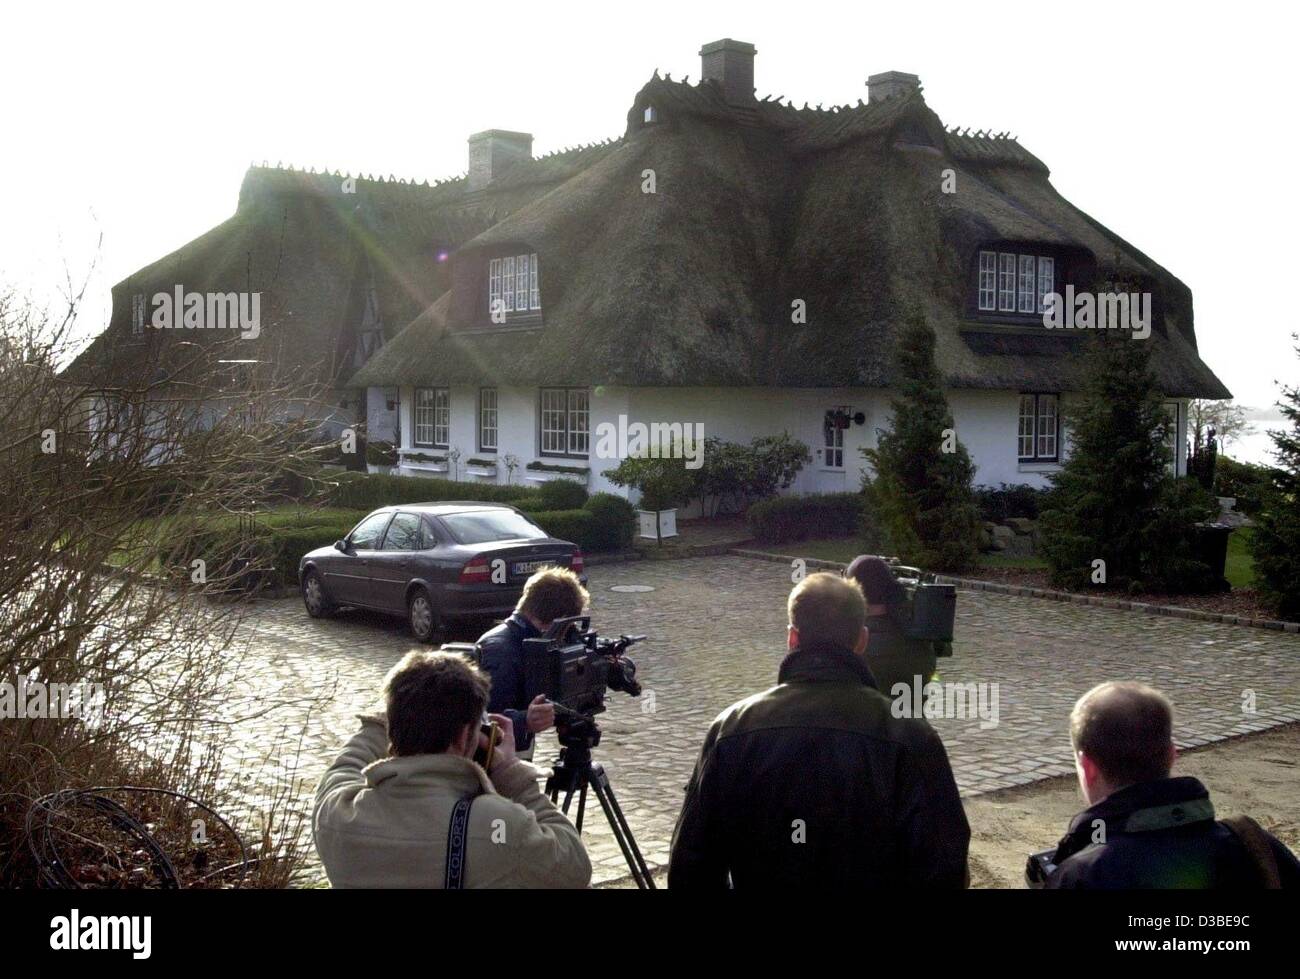 (dpa) - Journalists stand in front of the private home of the founder and majority shareholder of German telecommunication company Mobilcom, Gerhard Schmid, in Luerschau, northern Germany, 16 January 2003. German police and prosecutors on 16 January searched Schmid's private home and his wife's comp Stock Photo